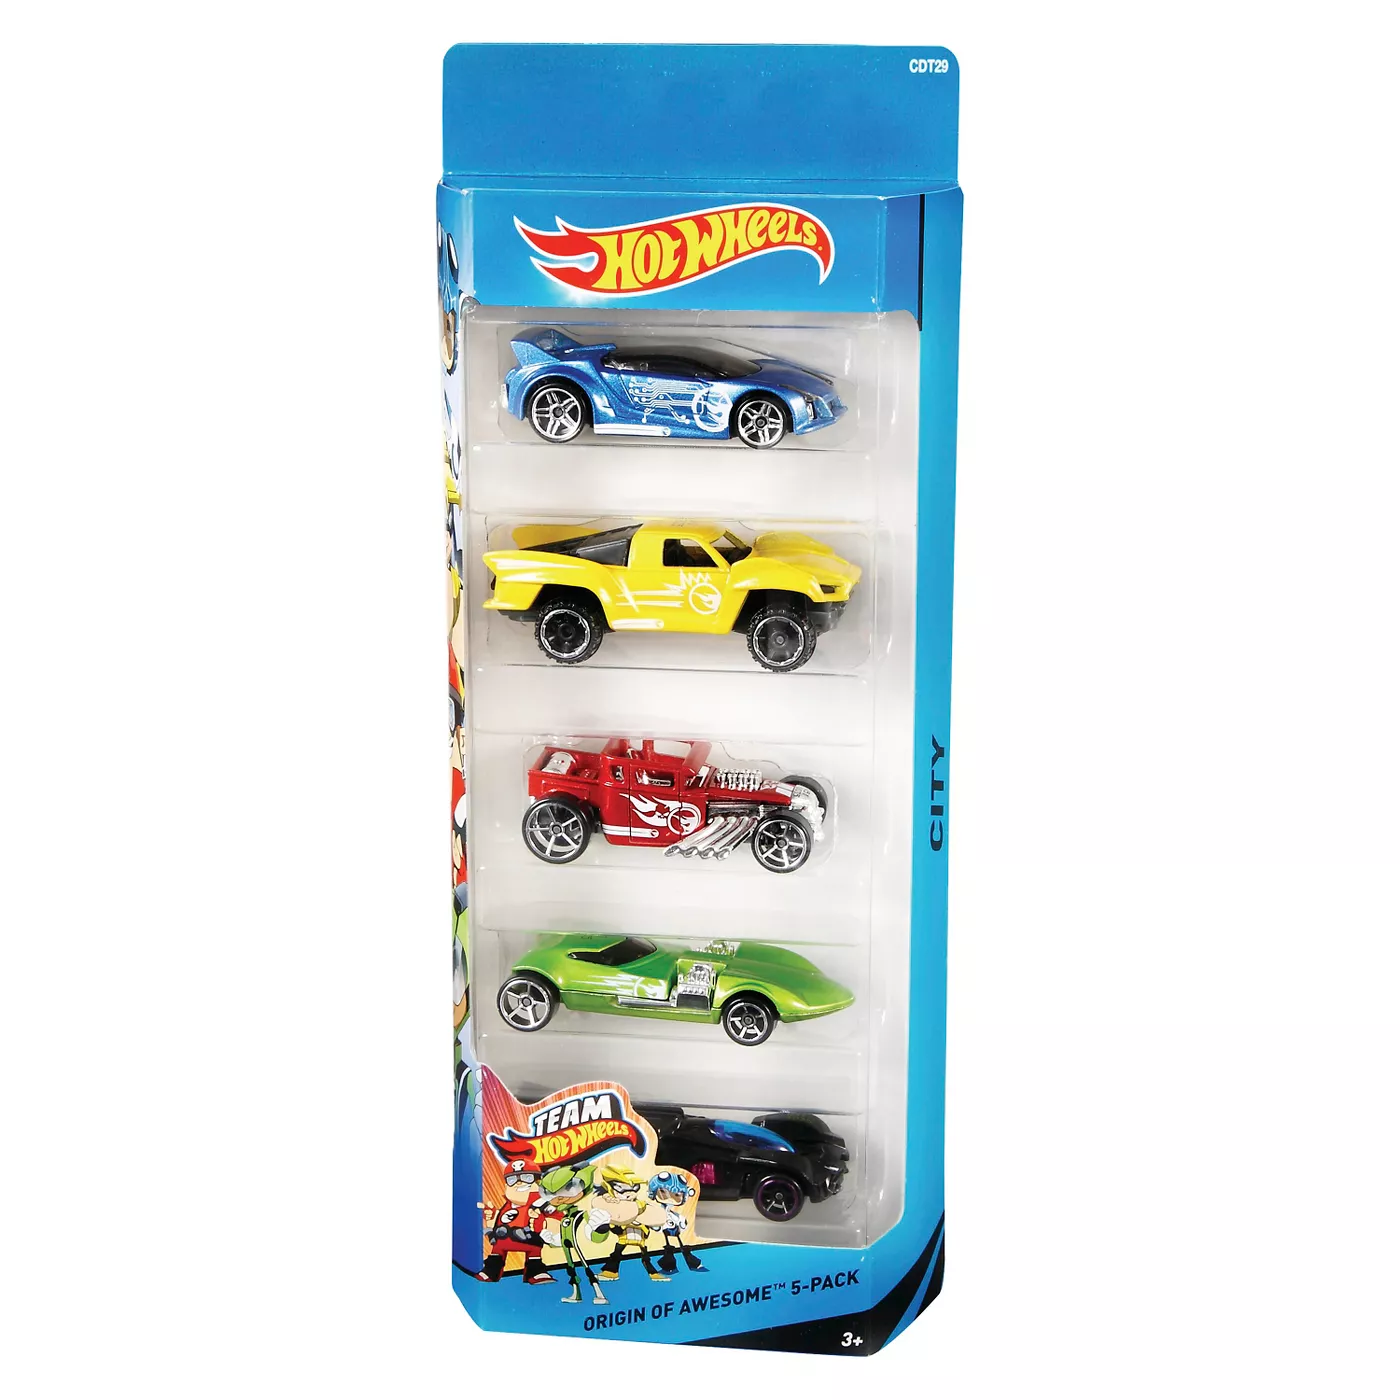 Hot Wheels Diecast 5 Car Pack - image 1 of 9